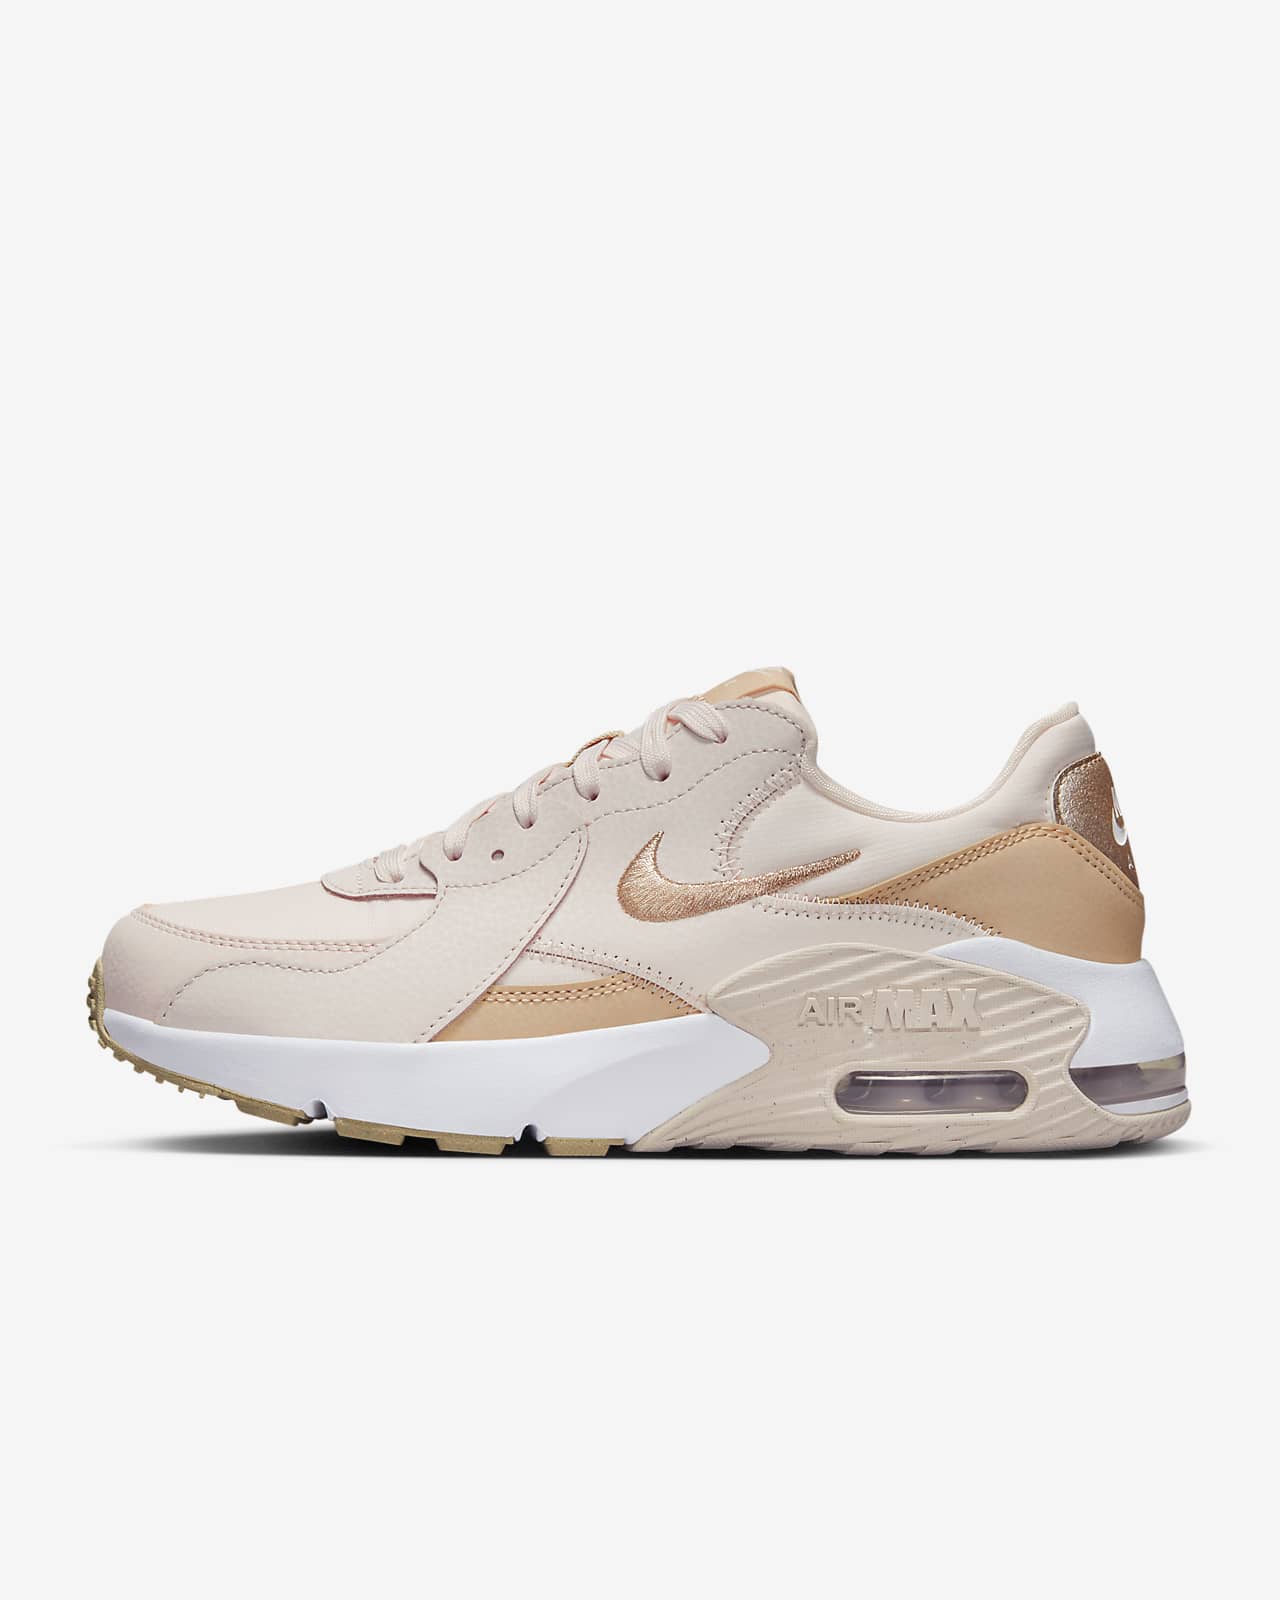 Asesor Altoparlante Aplicable Nike Air Max Excee Women's Shoes. Nike.com